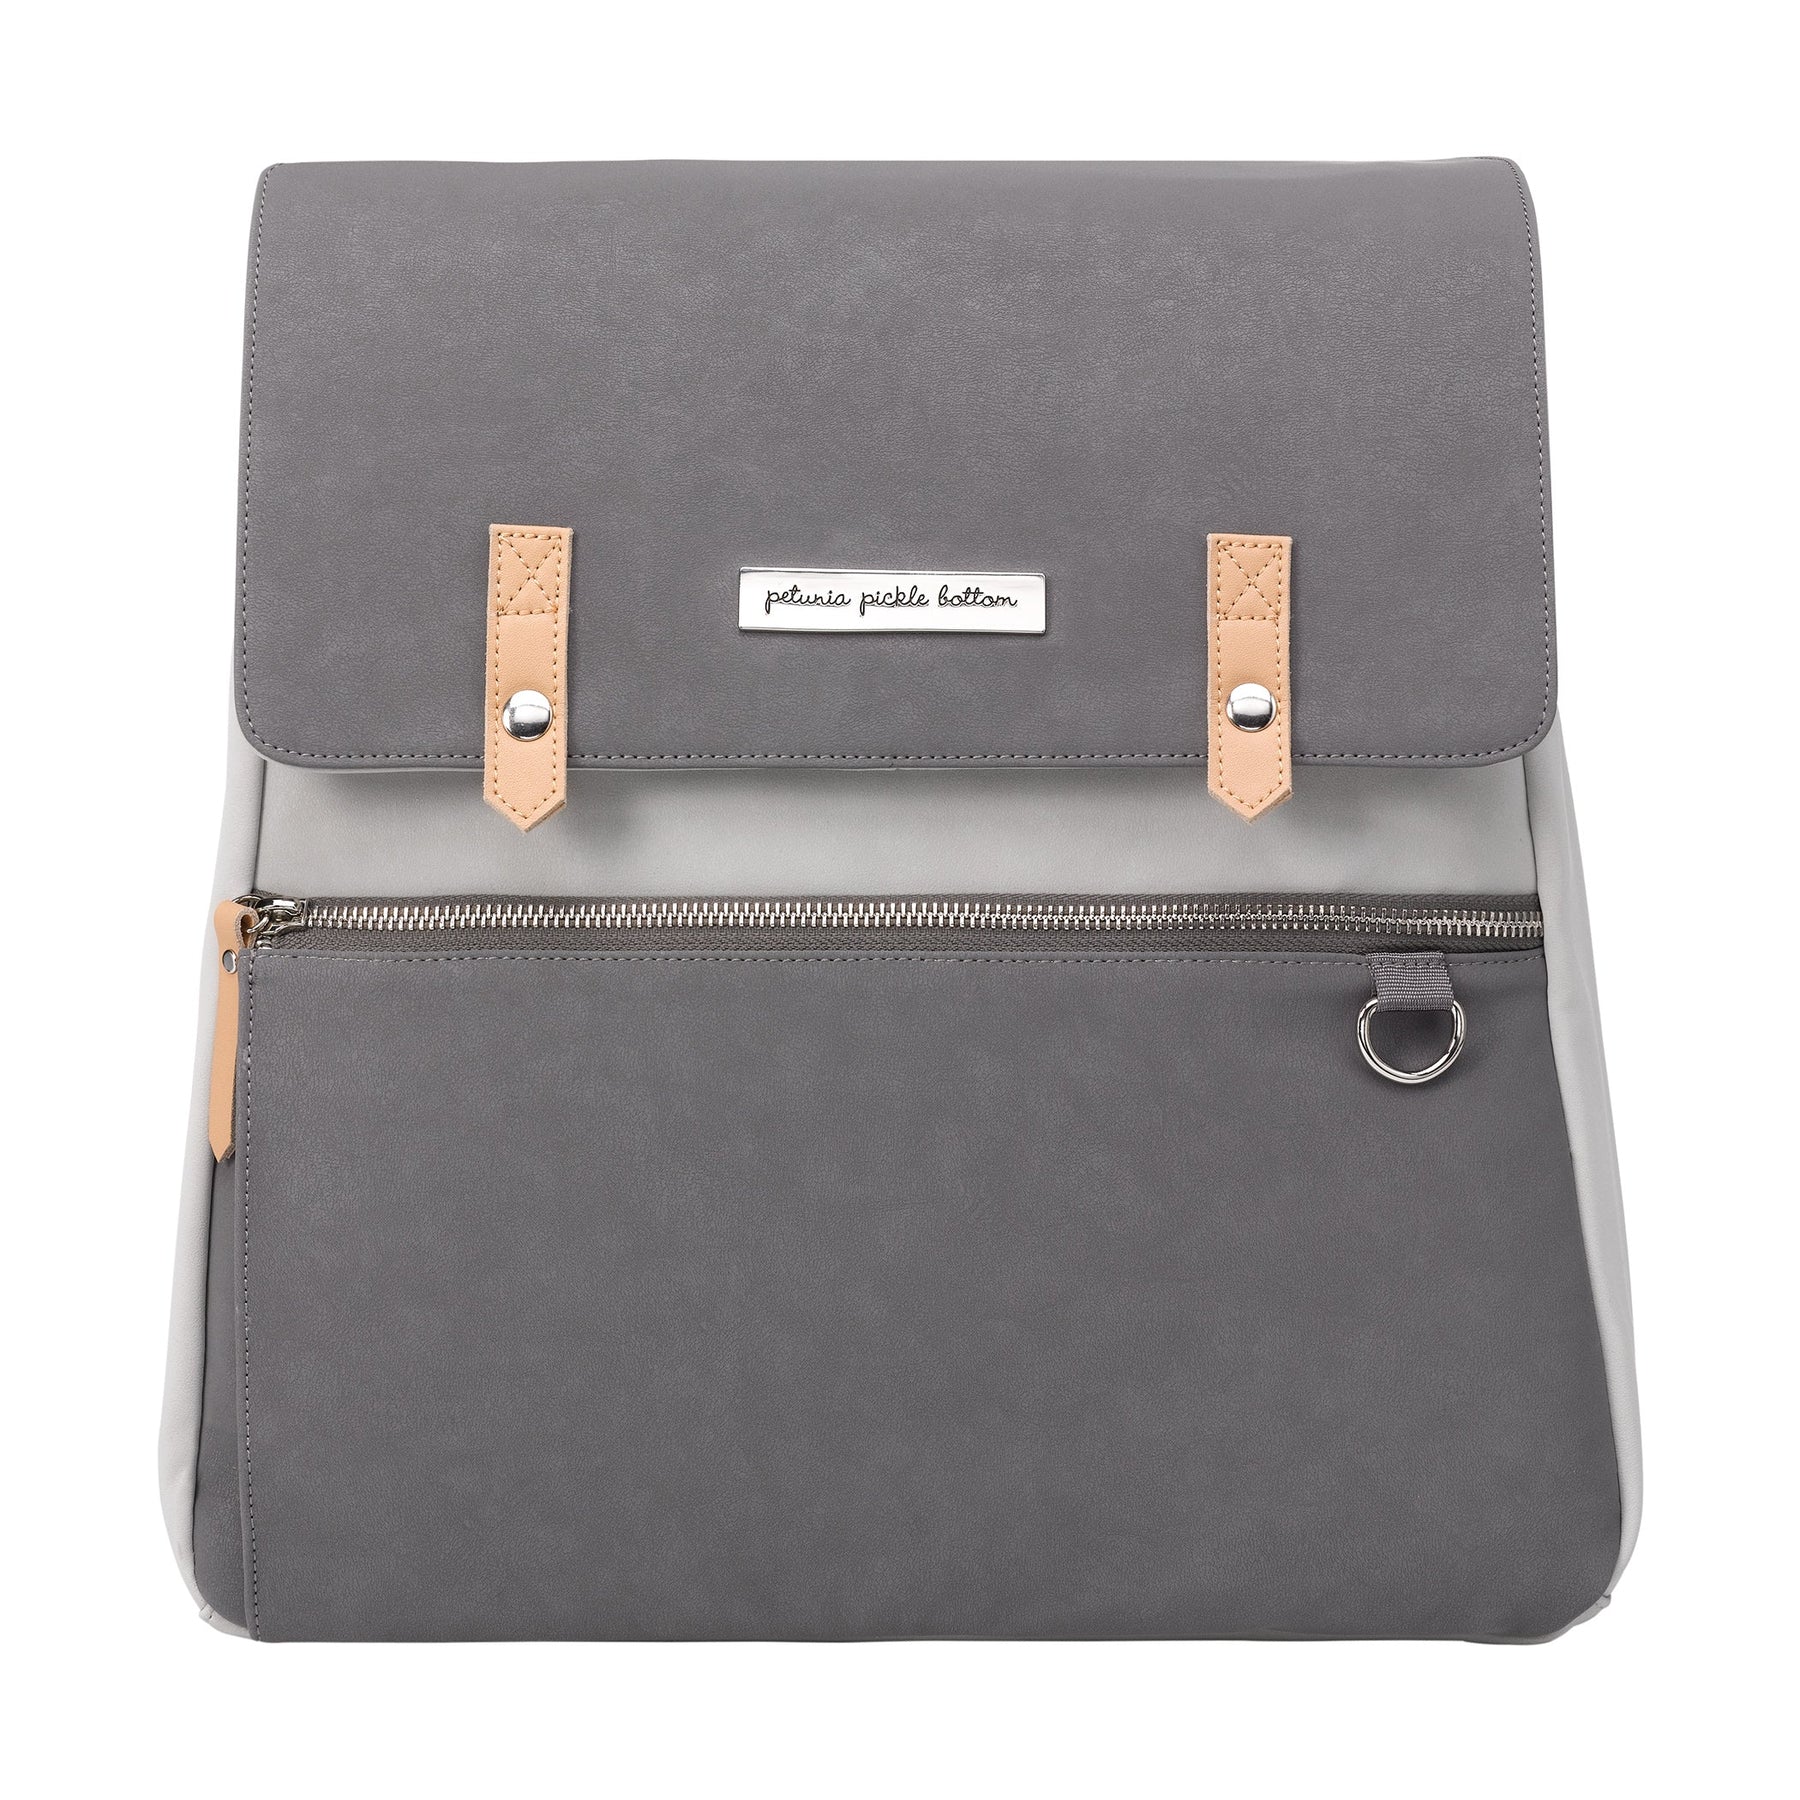 14 Leatherette Organizer Laptop Bag with Strap and Zippers | Shop